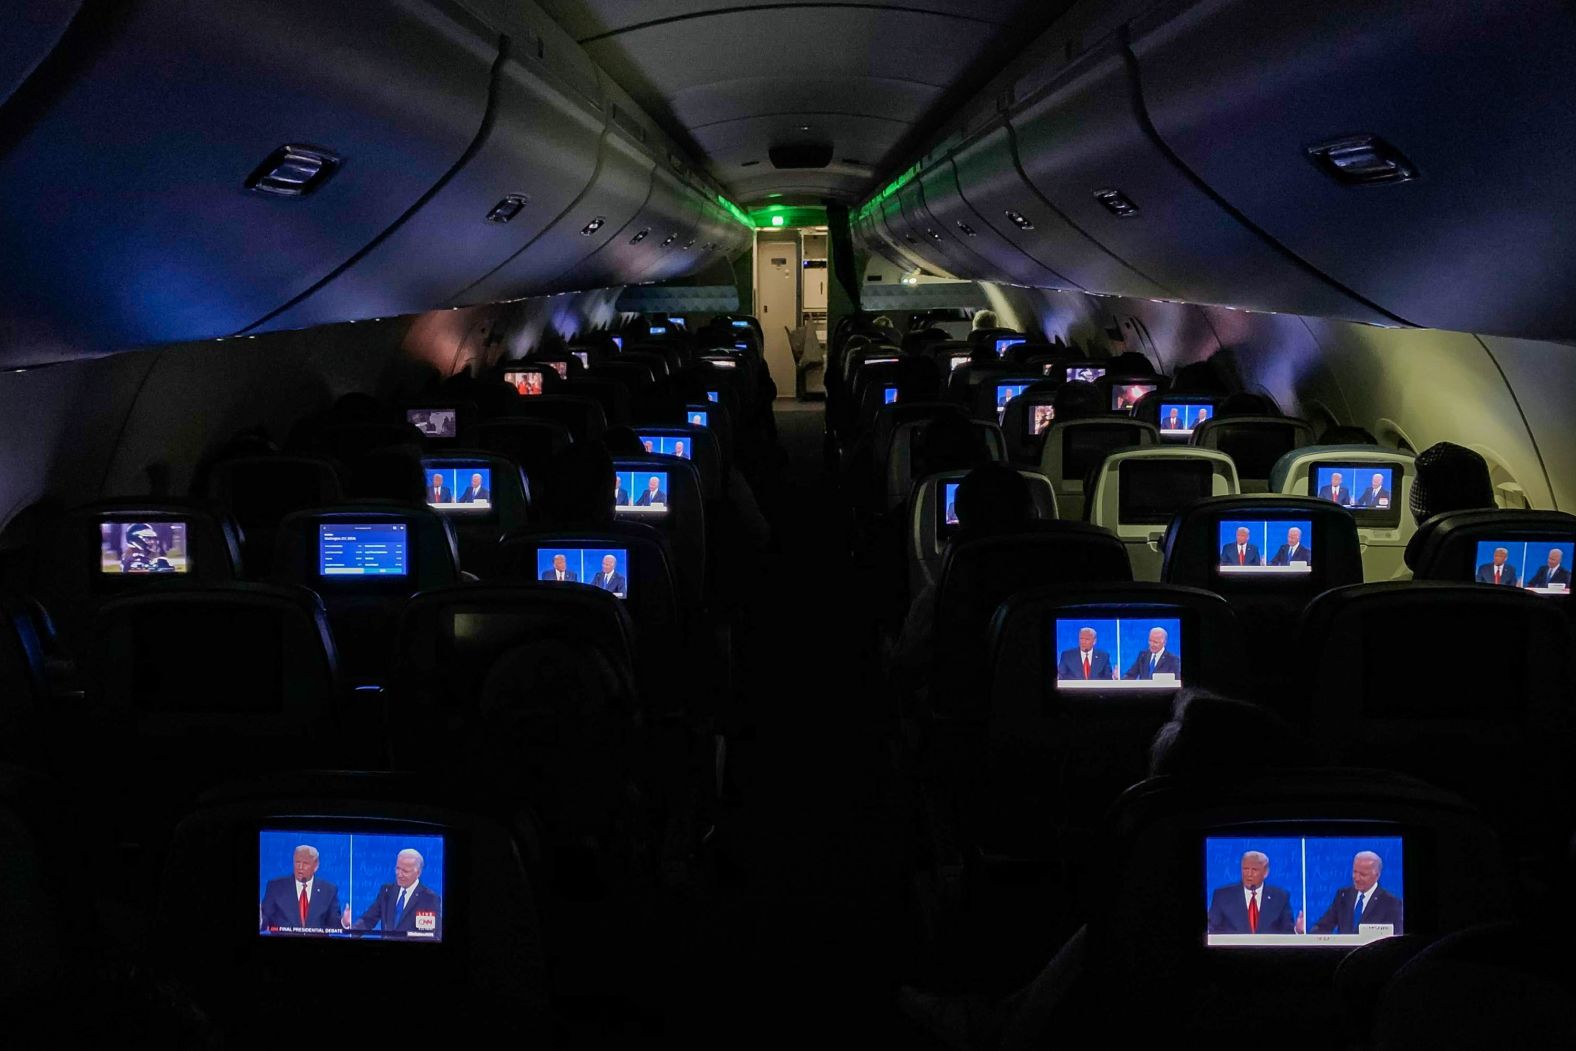 The final presidential debate between Joe Biden and President Donald Trump appears on screens during a flight from Detroit in 2020.